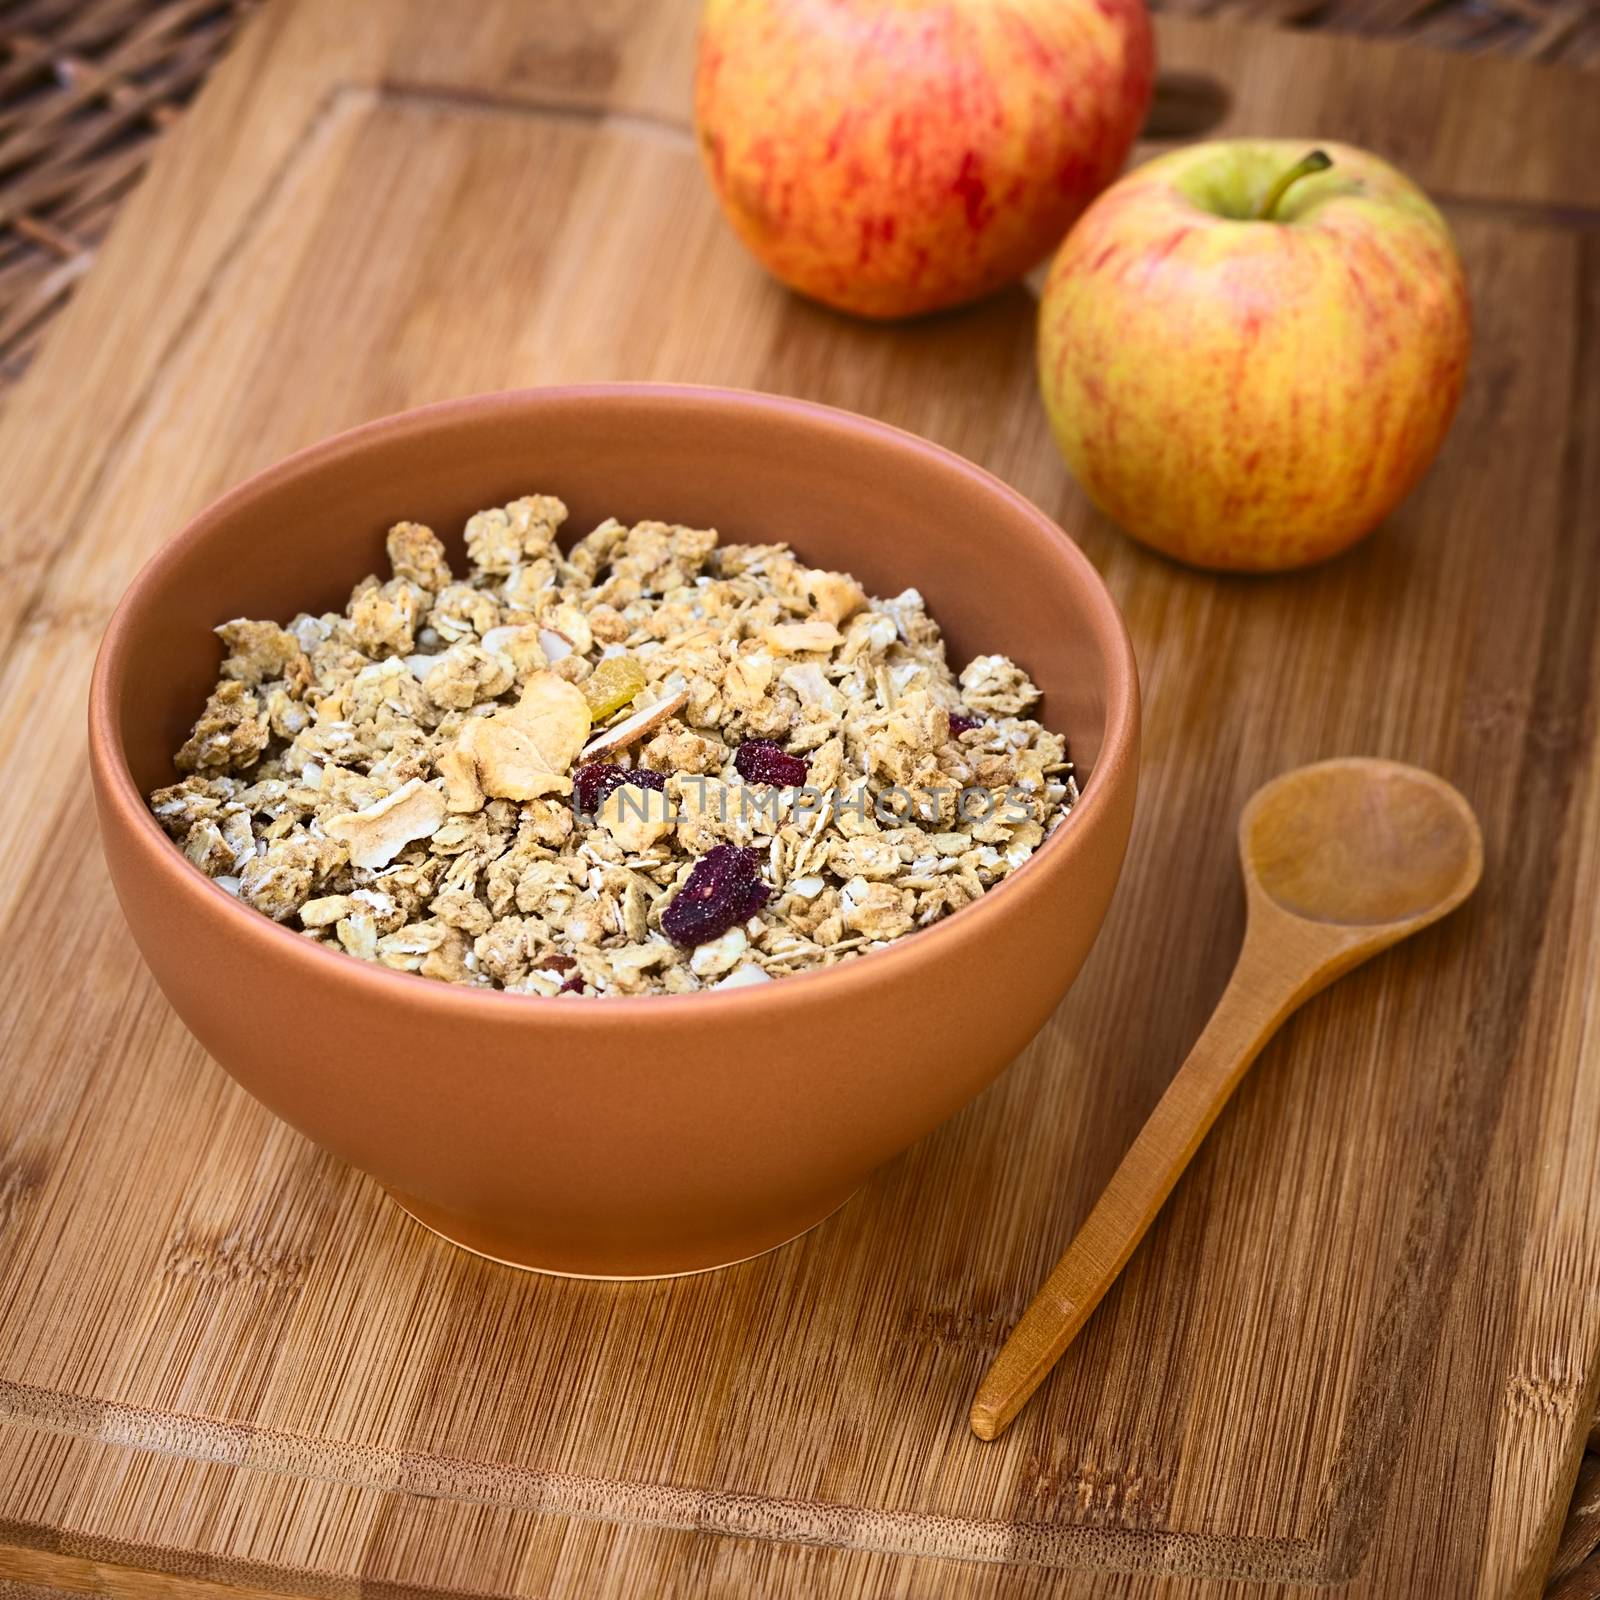 Bowl of healthy oatmeal cereal with almonds, dried apple and cranberries photographed with natural light (Selective Focus, Focus in the middle of the granola)